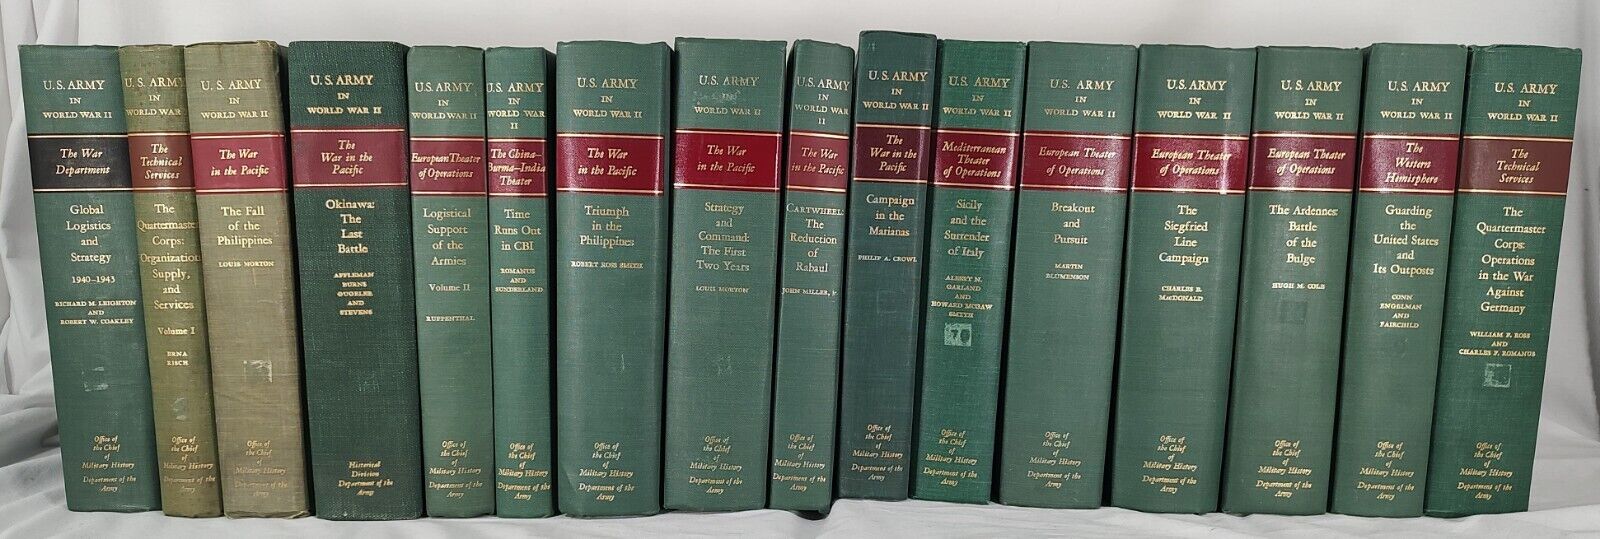 United States Army In World War II Green Books Set Official U.S. Army Records